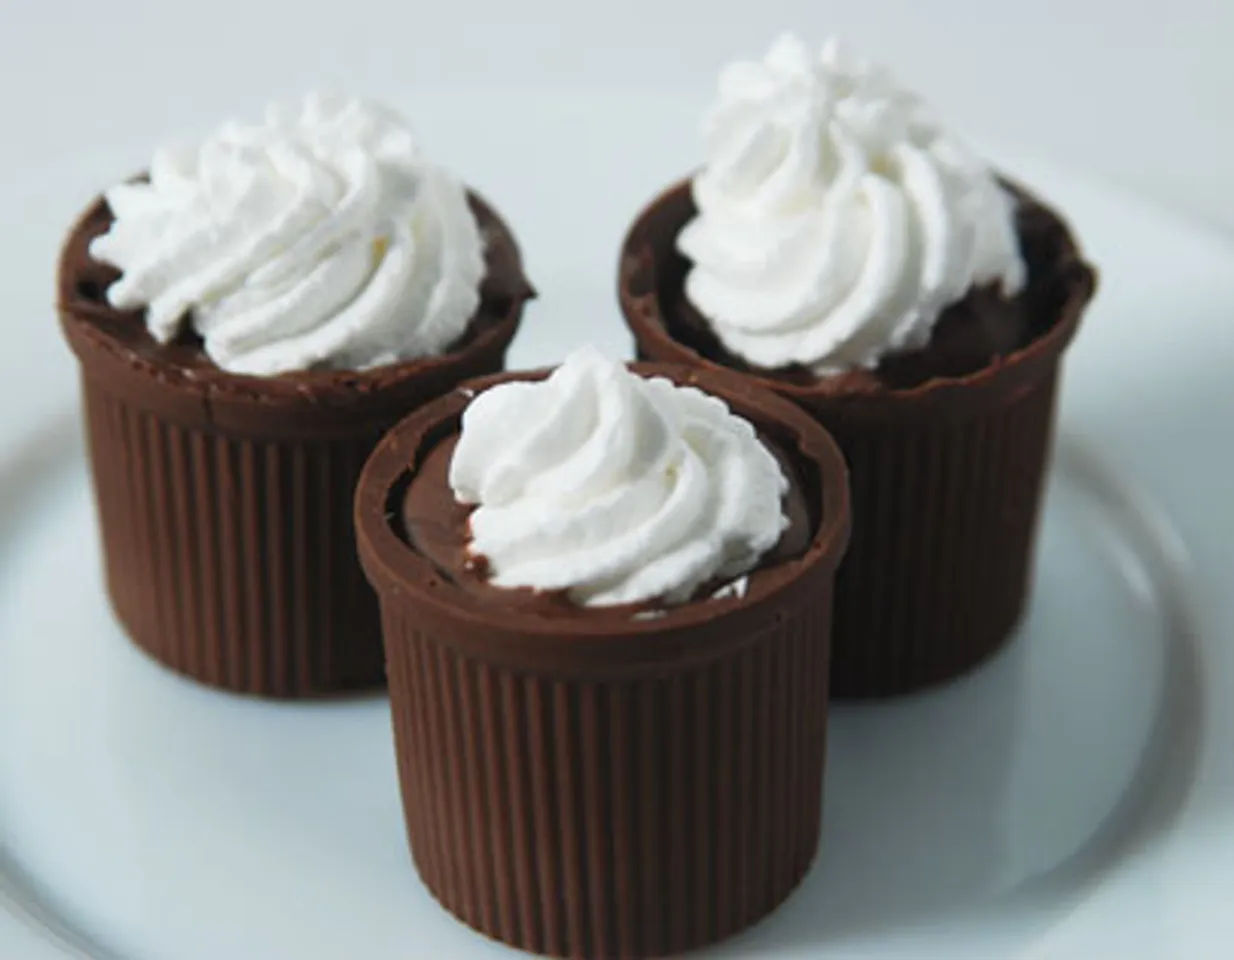 Chocolate Cups With Chocolate Mousse